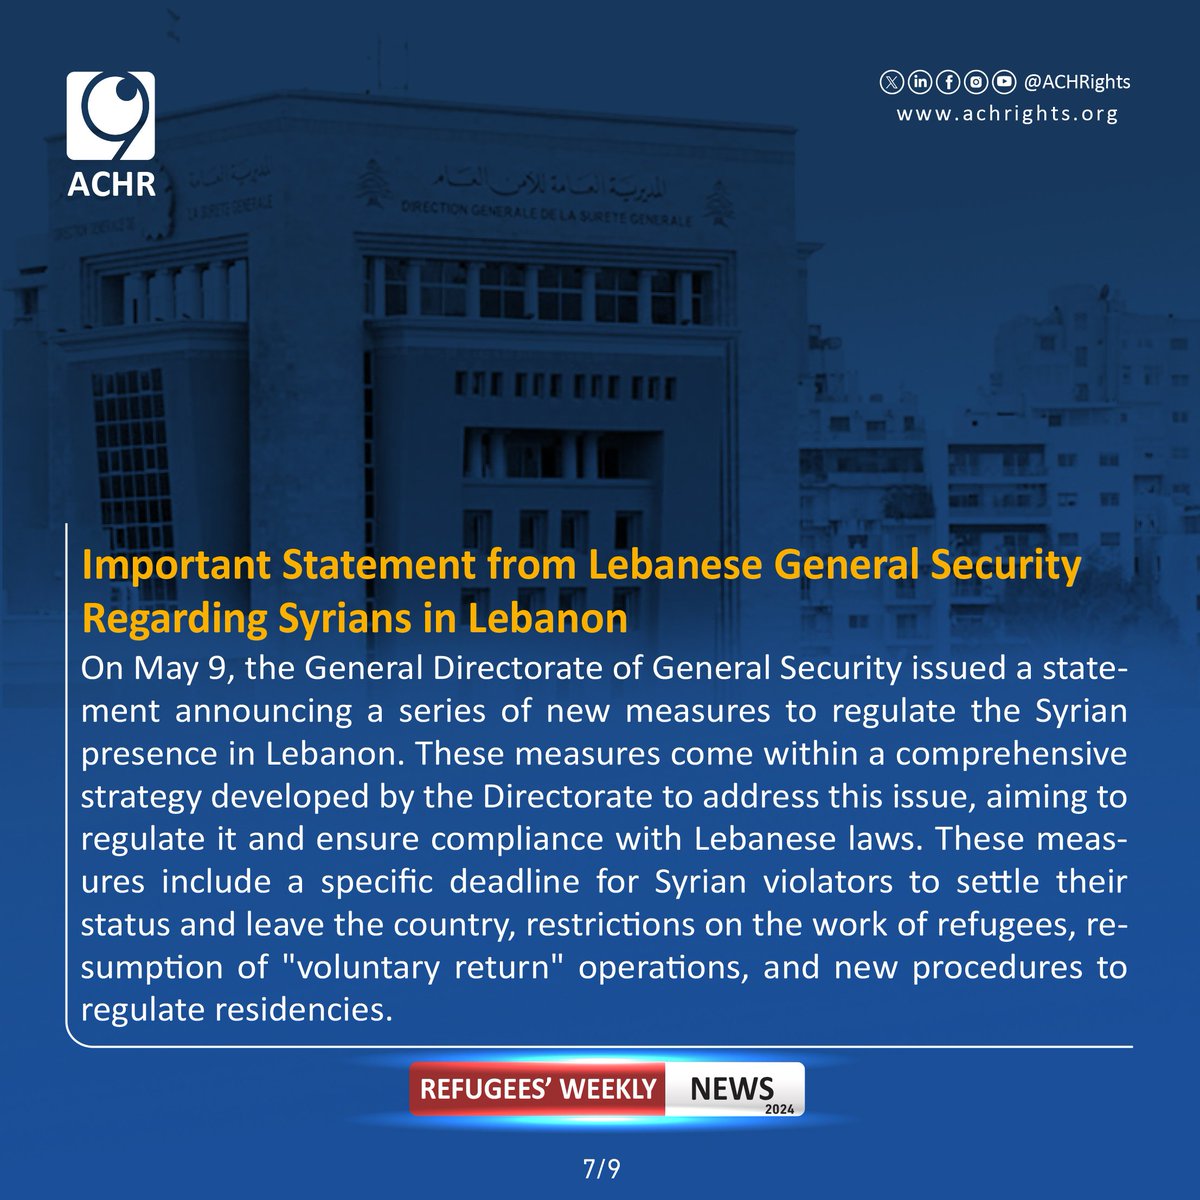 Important Statement from Lebanese General Security Regarding Syrians in Lebanon.
#Together_for_Human_Rights #weeklynews #violations #humanrights #syrianrefugees #lebanon #syria #RefugeesRight